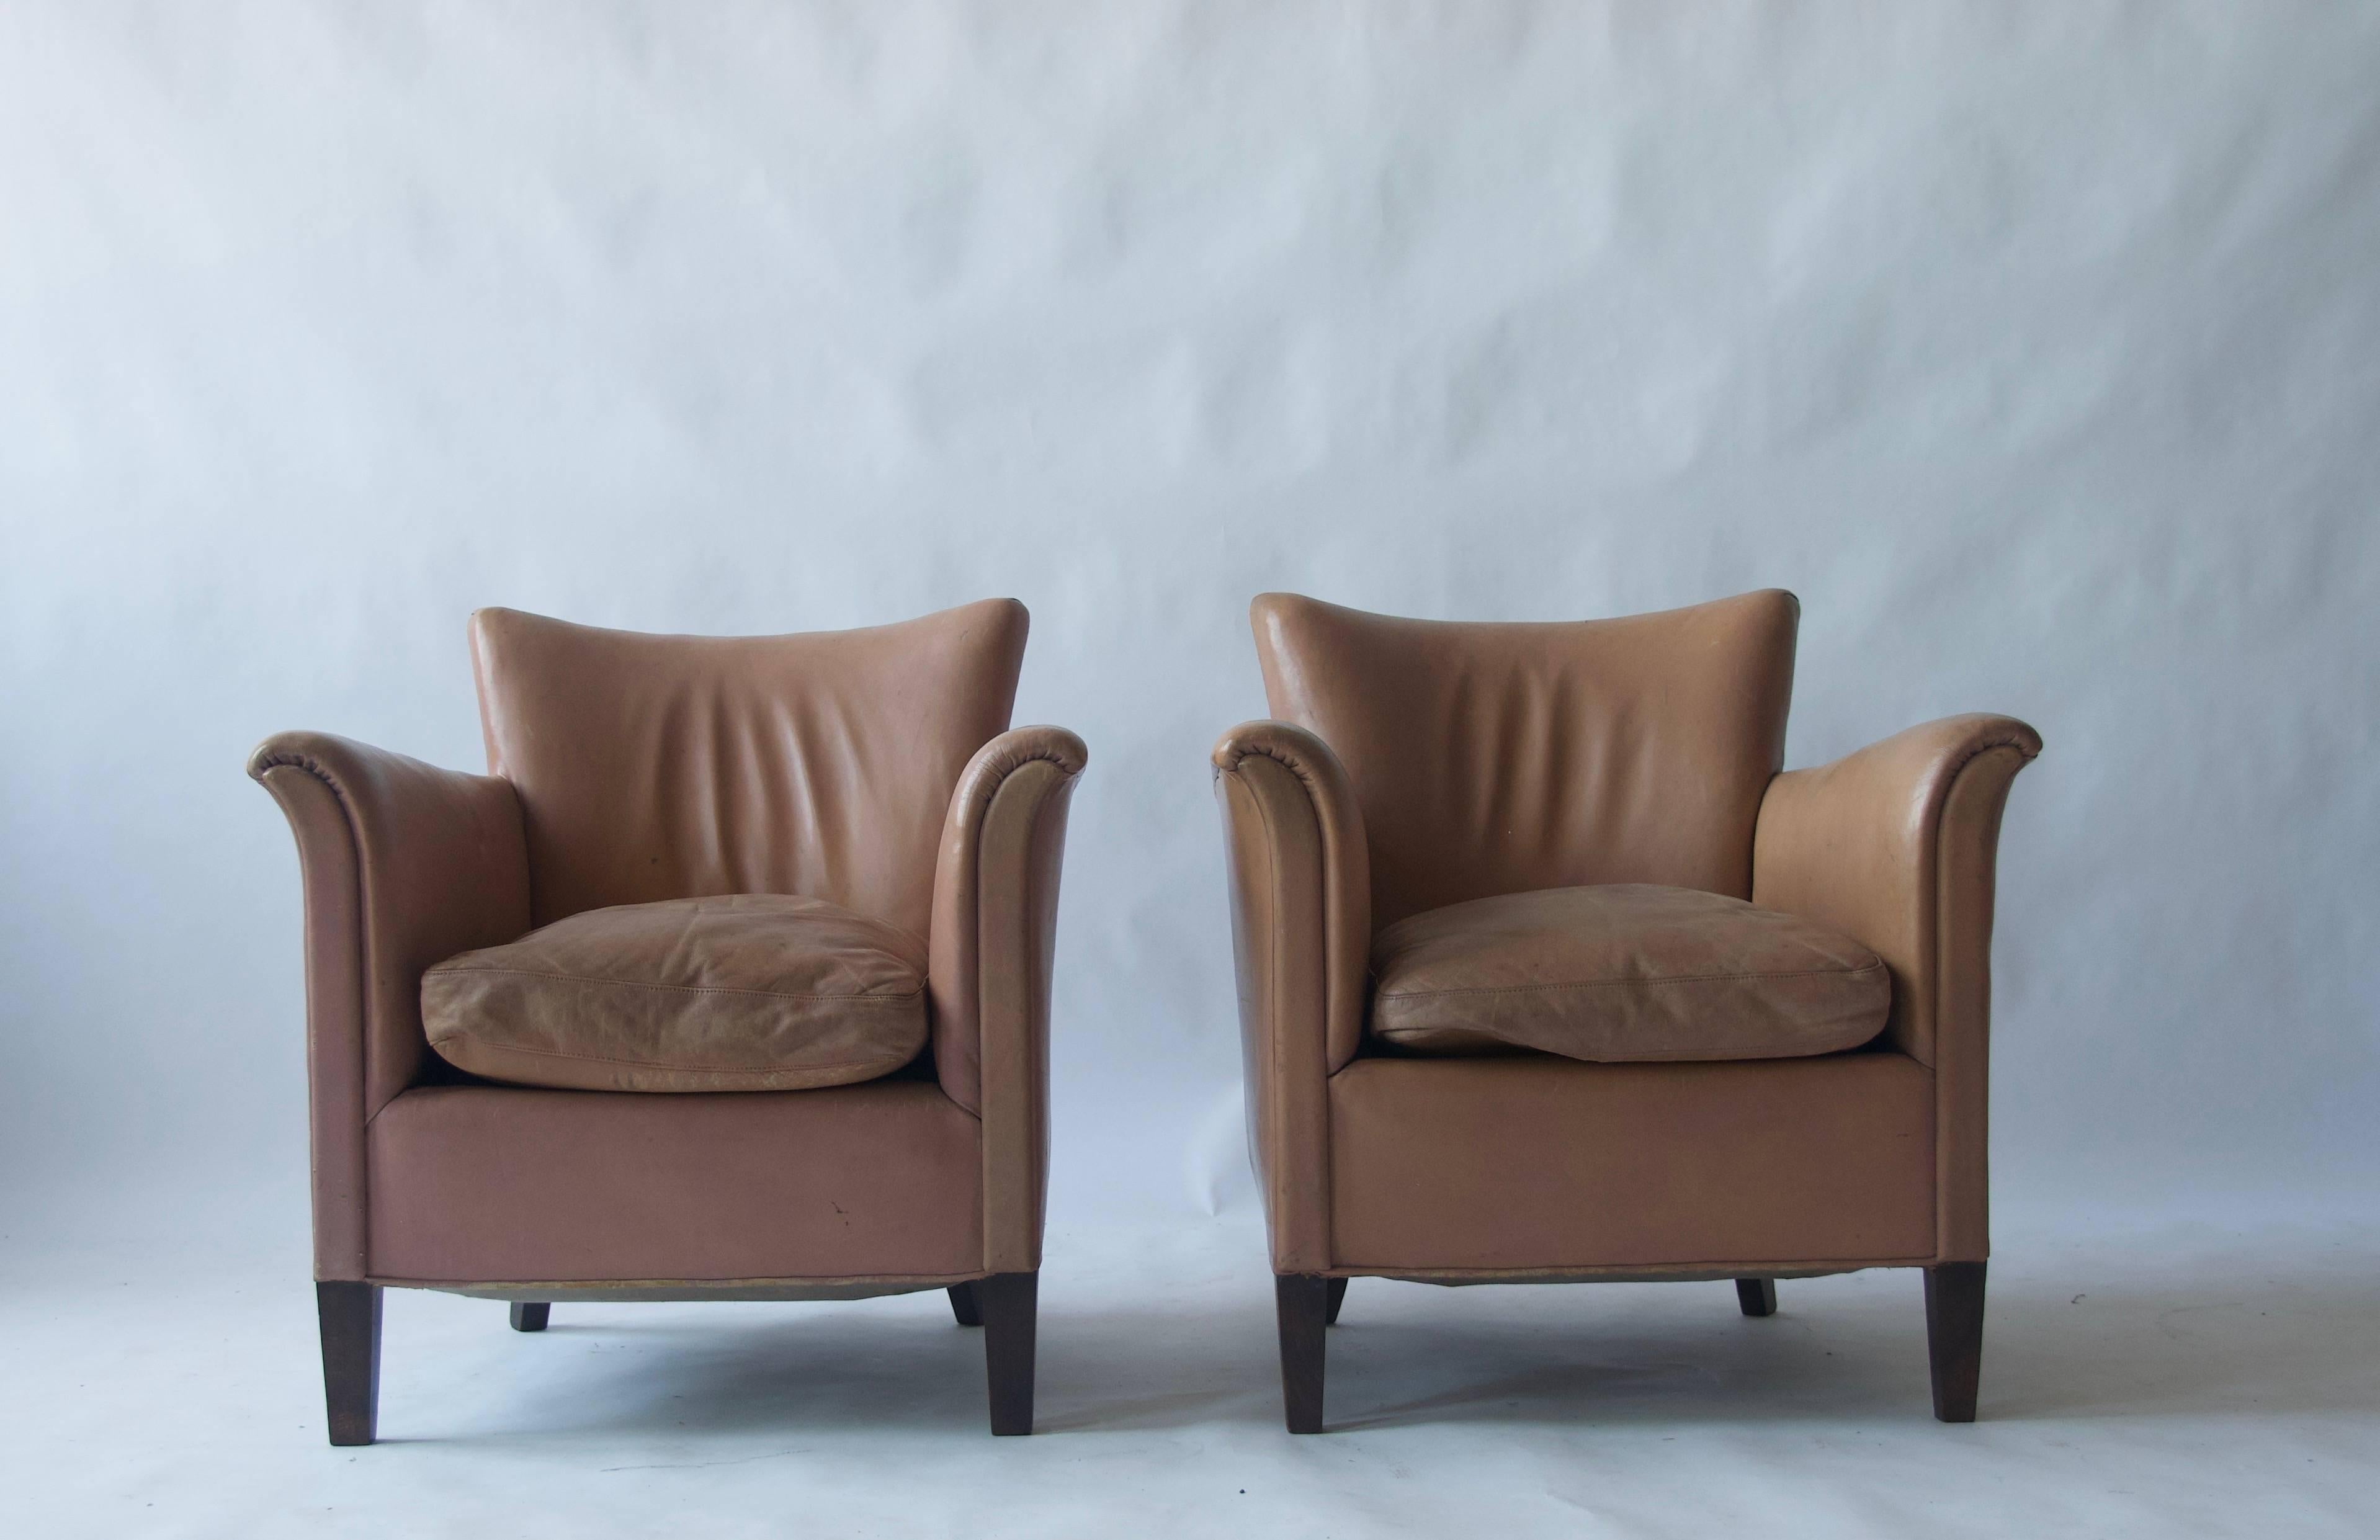 Pair of 1930s Danish leather club chairs.
(Last 2 images are examples of the same pair of chairs and not included in the listing).